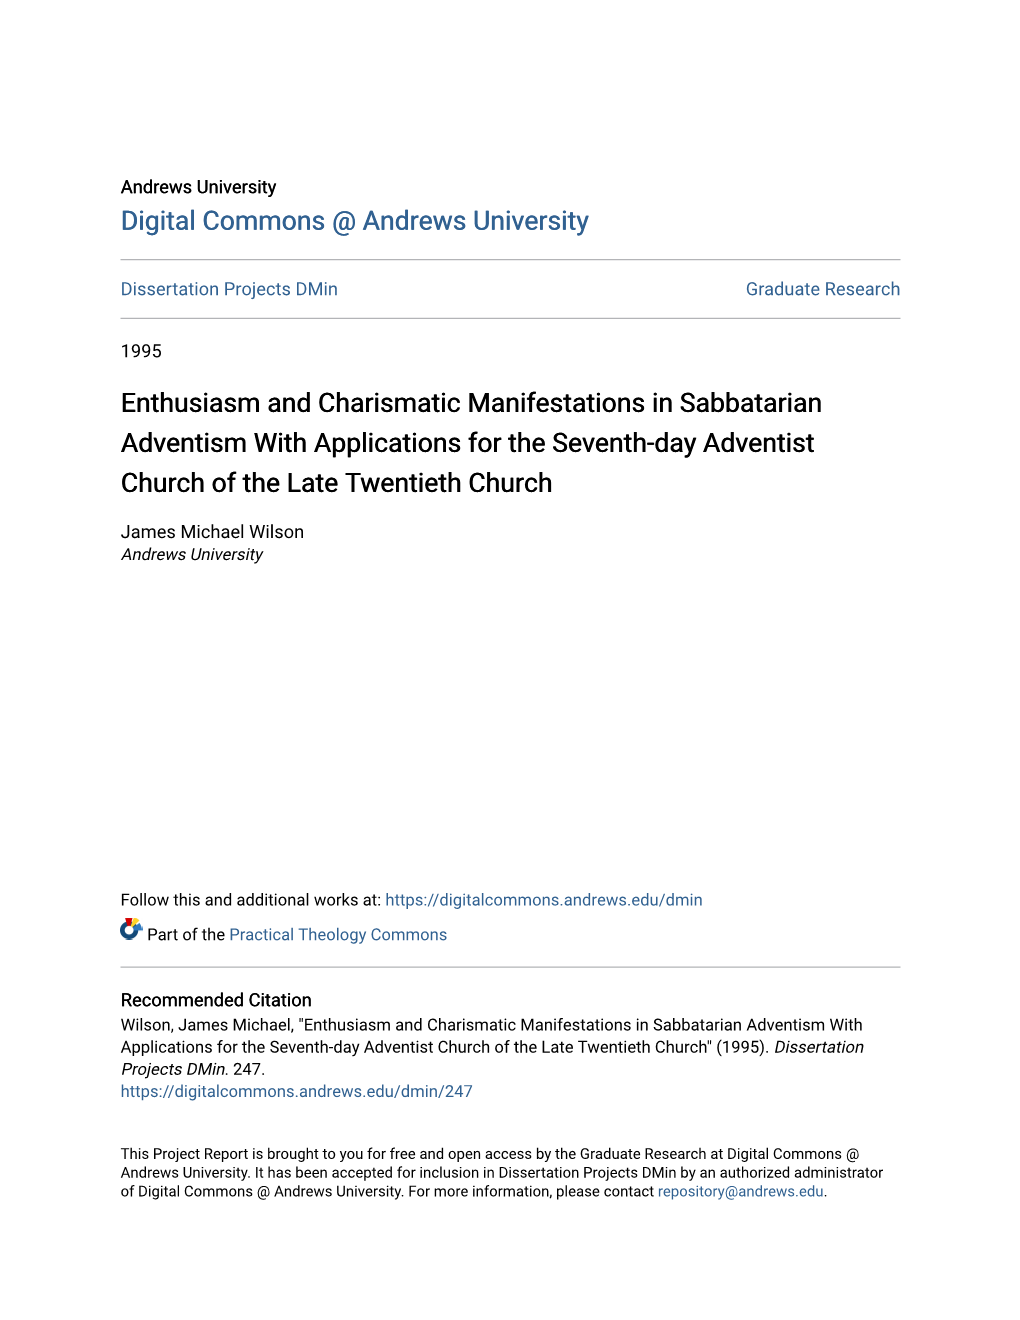 Enthusiasm and Charismatic Manifestations in Sabbatarian Adventism with Applications for the Seventh-Day Adventist Church of the Late Twentieth Church